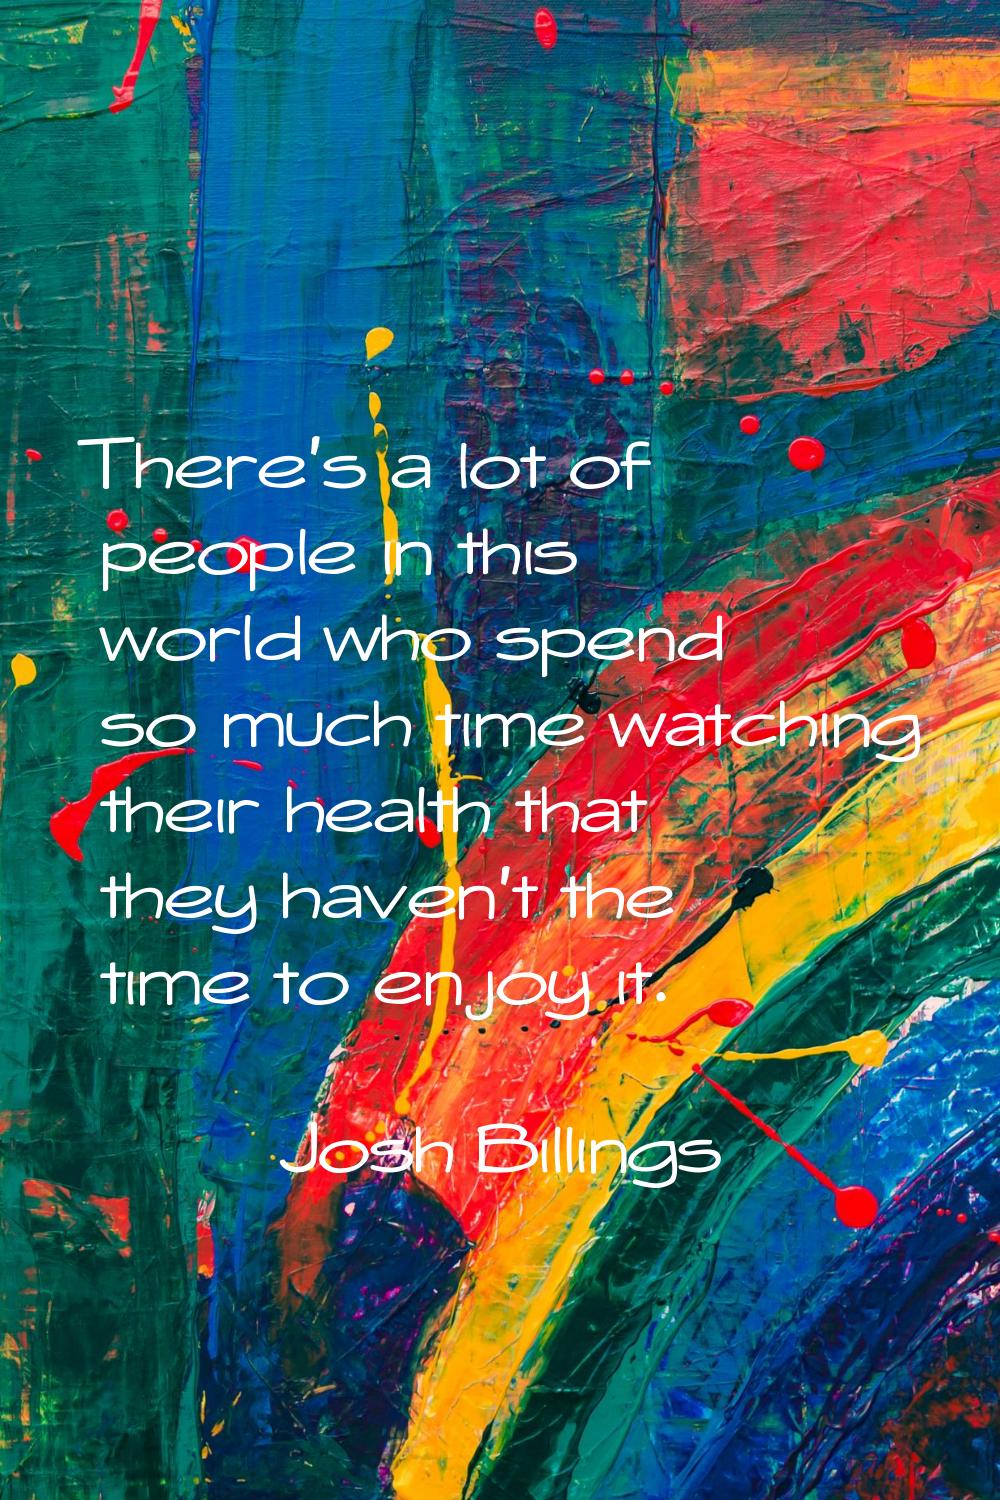 There's a lot of people in this world who spend so much time watching their health that they haven'